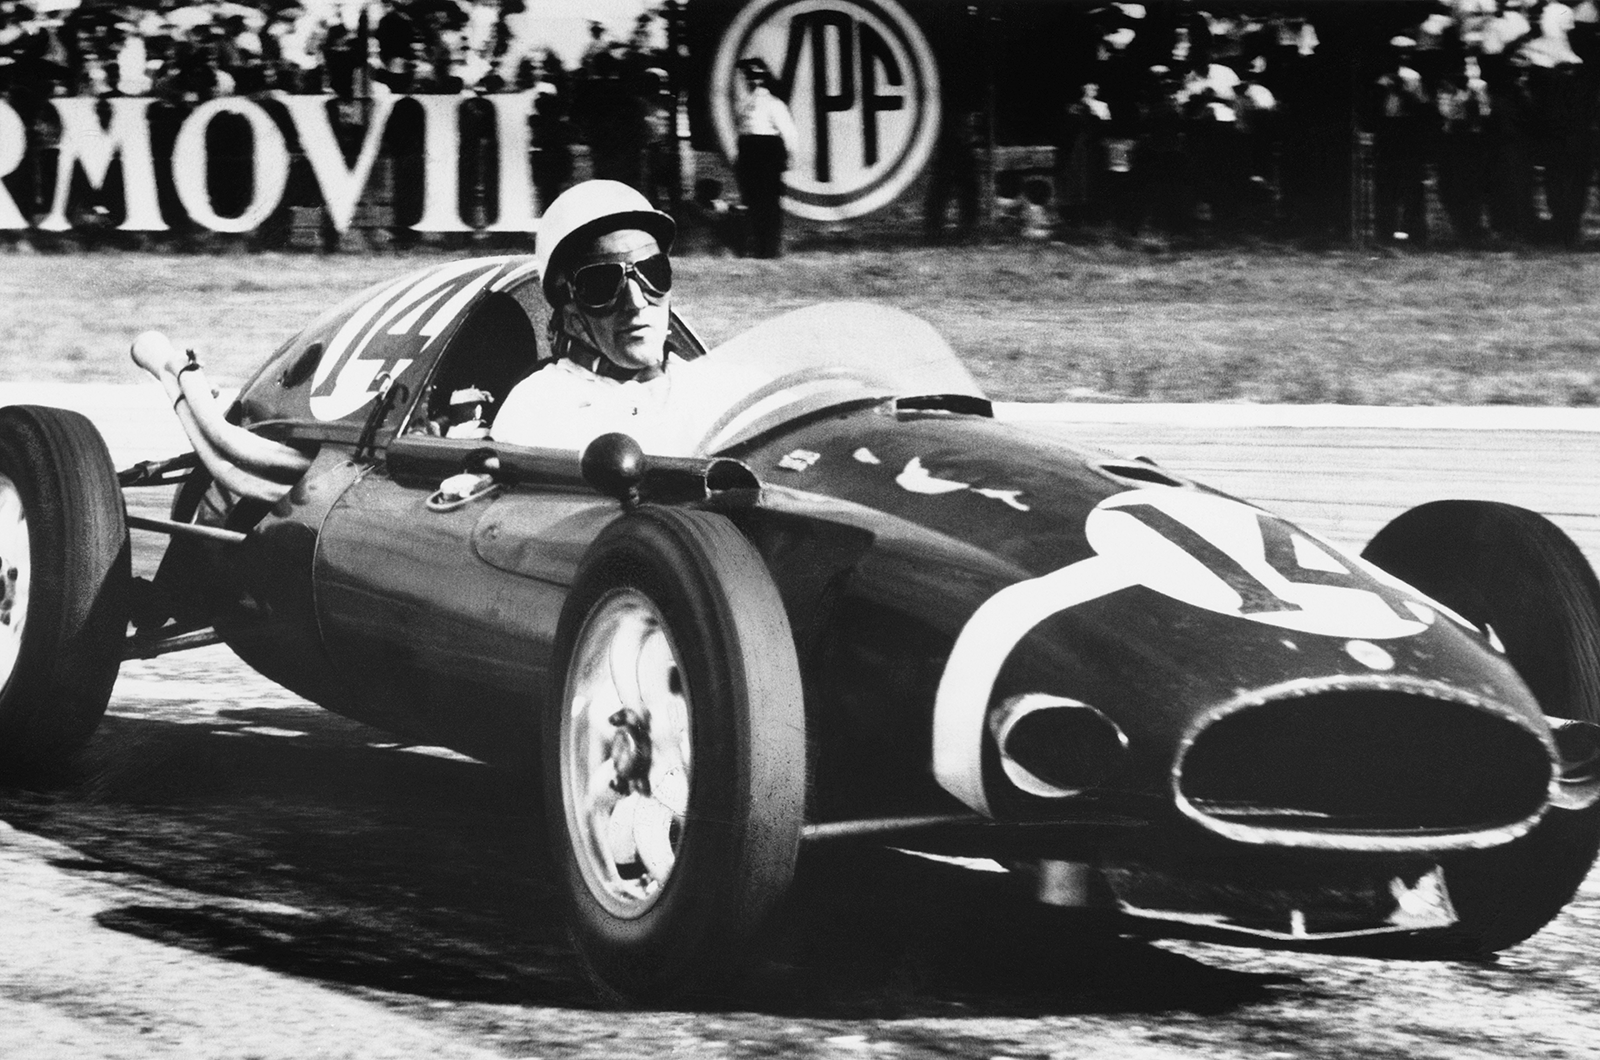 Stirling Moss claims a historic victory at Buenos Aires in his Cooper-Climax